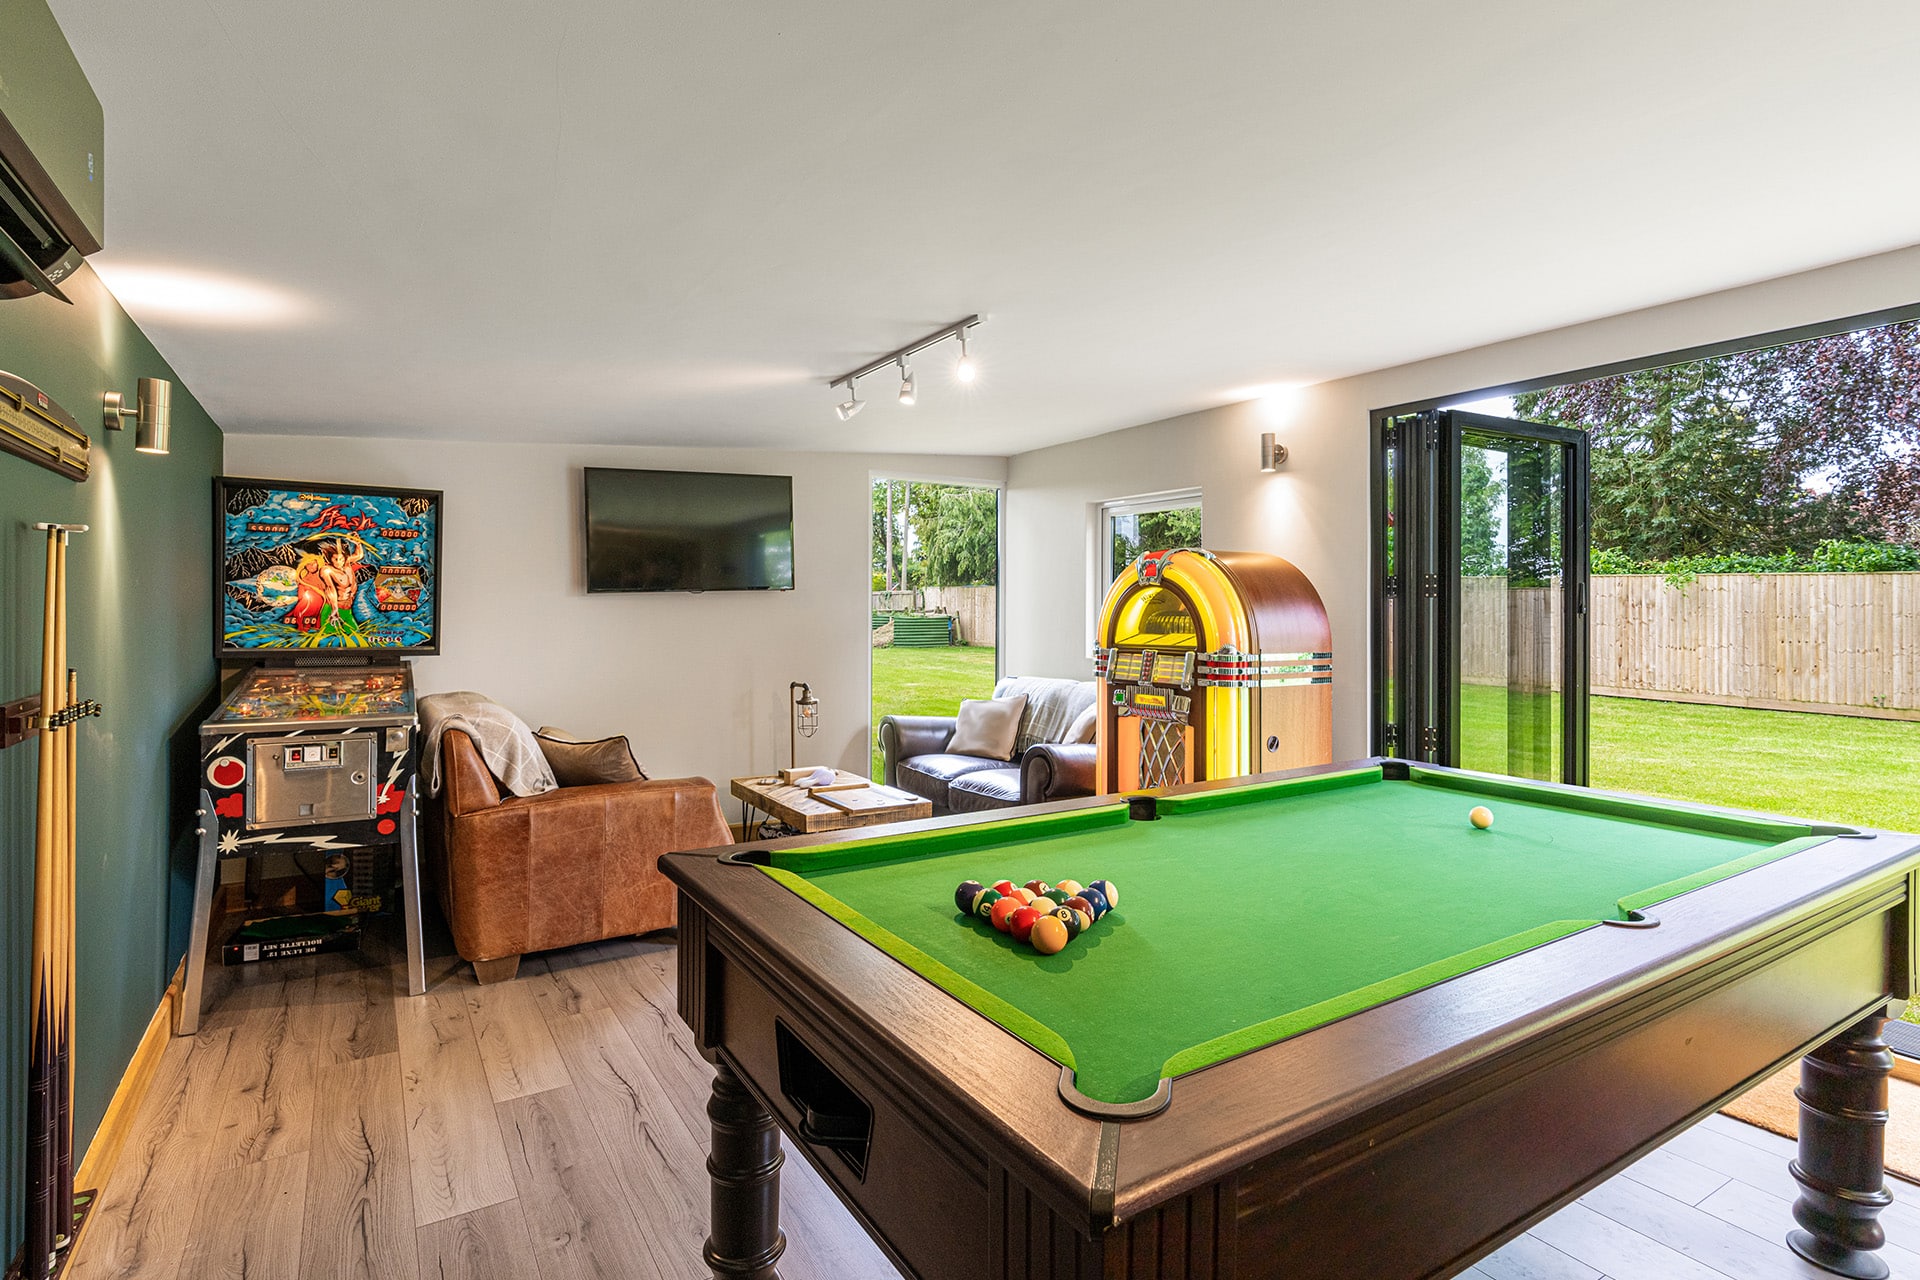 close up pool table in a garden games room and man cave ideas